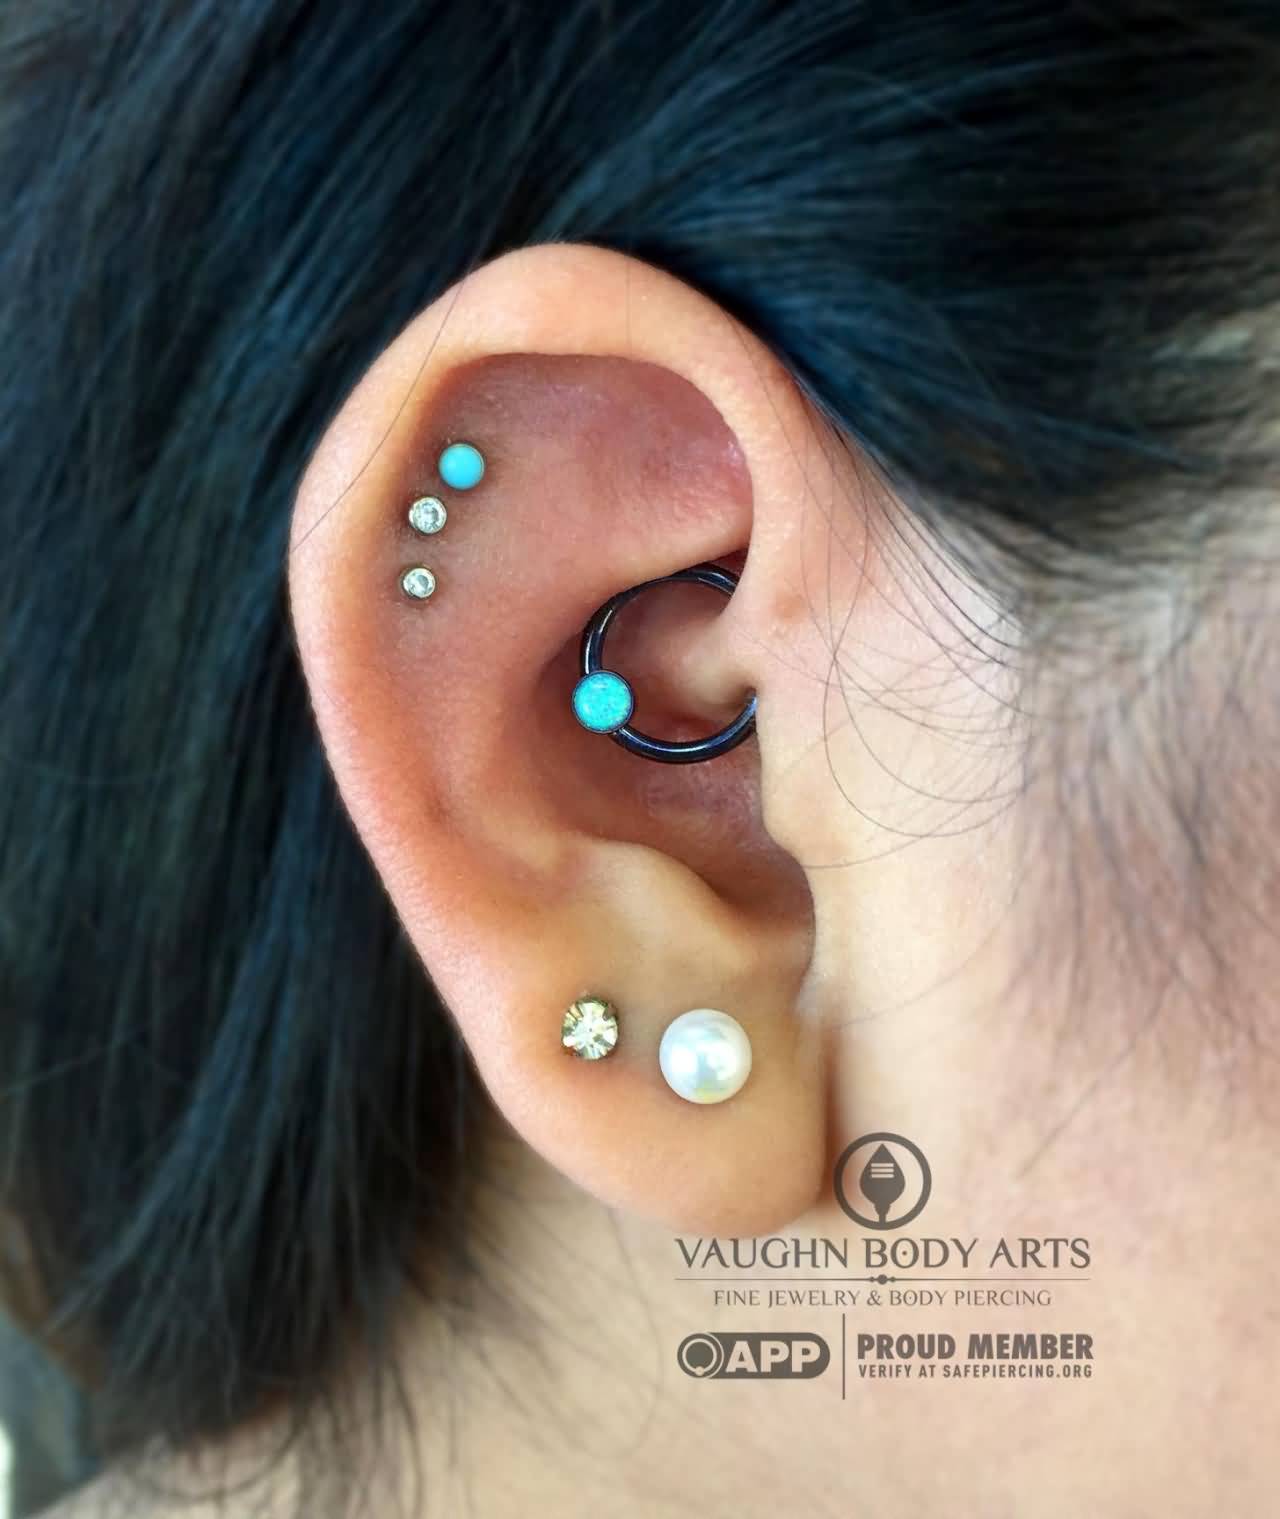 Double Lobes And Blue Bead Ring Daith Piercing